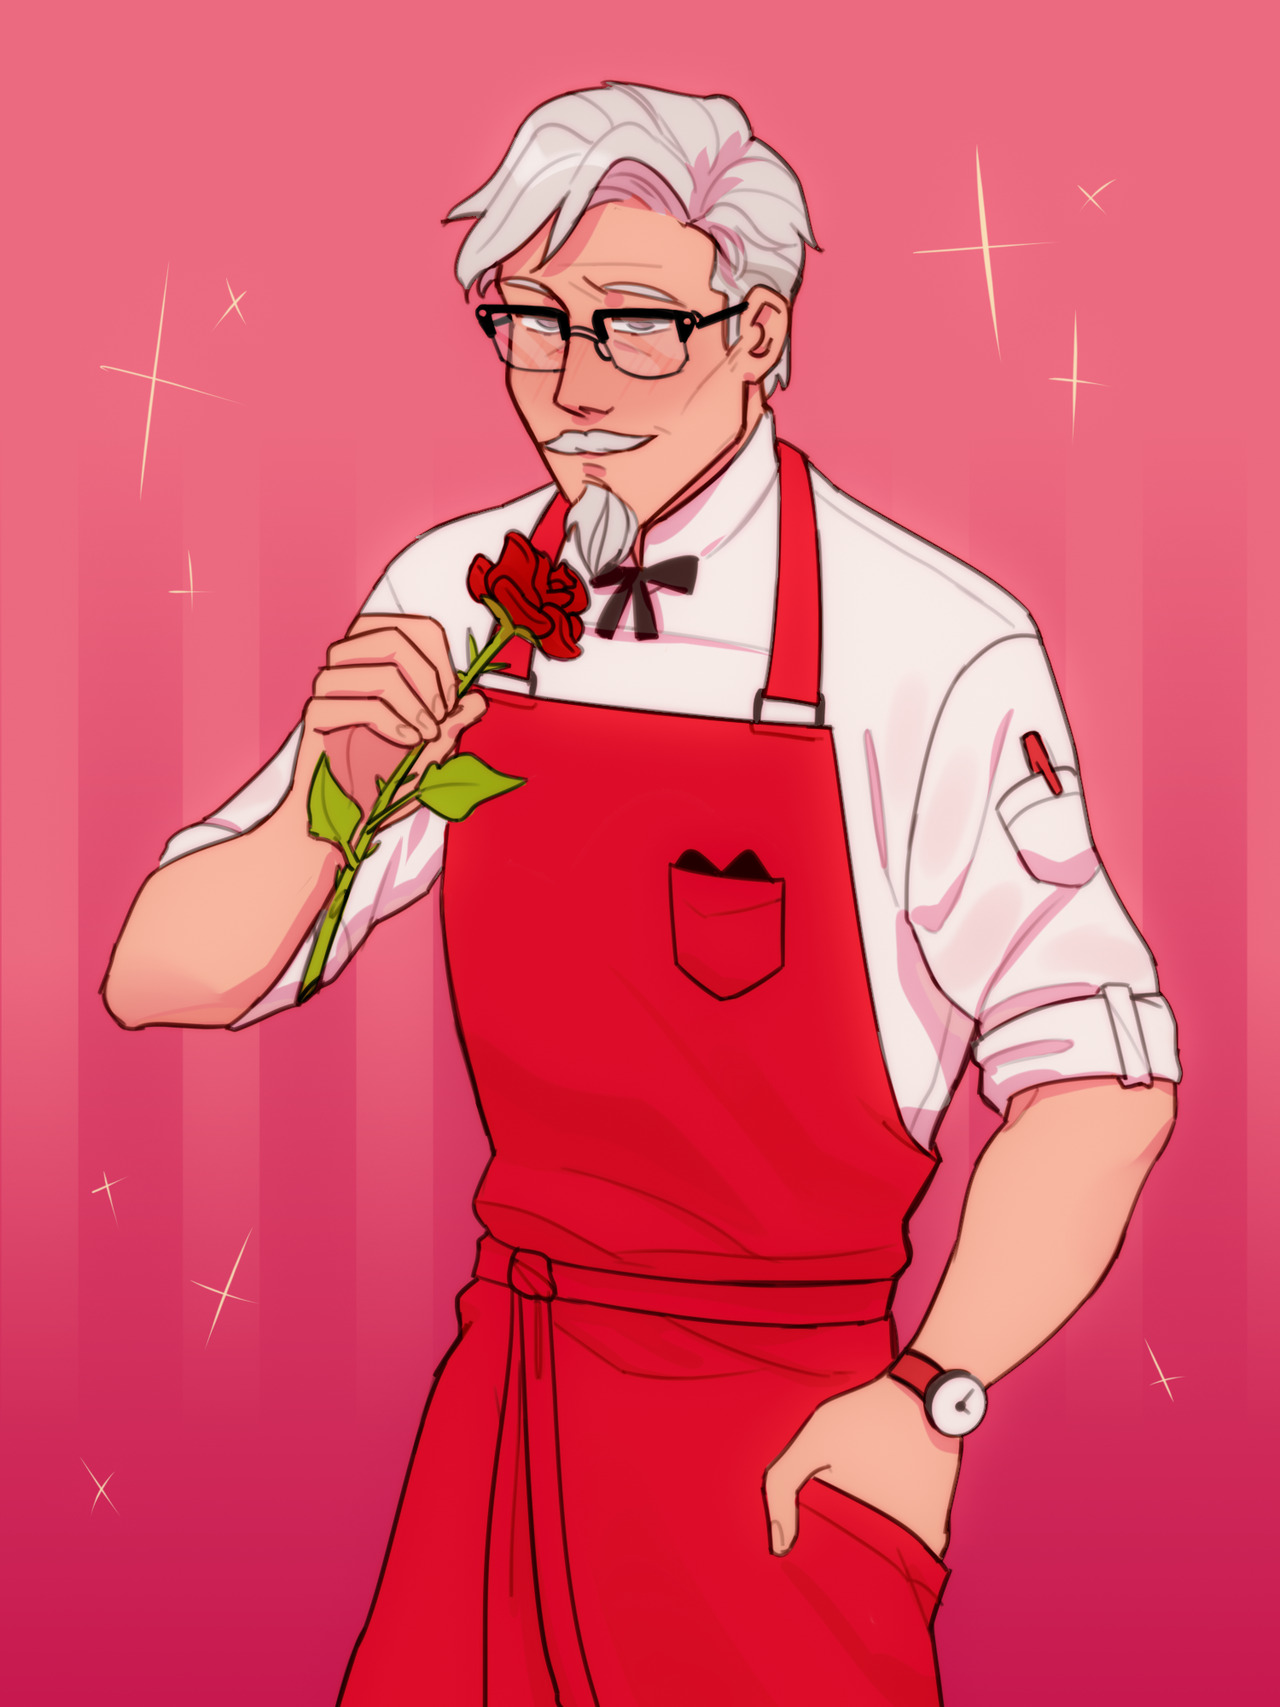 Smooch Colonel Sanders in This Official KFC Dating Sim  IGN